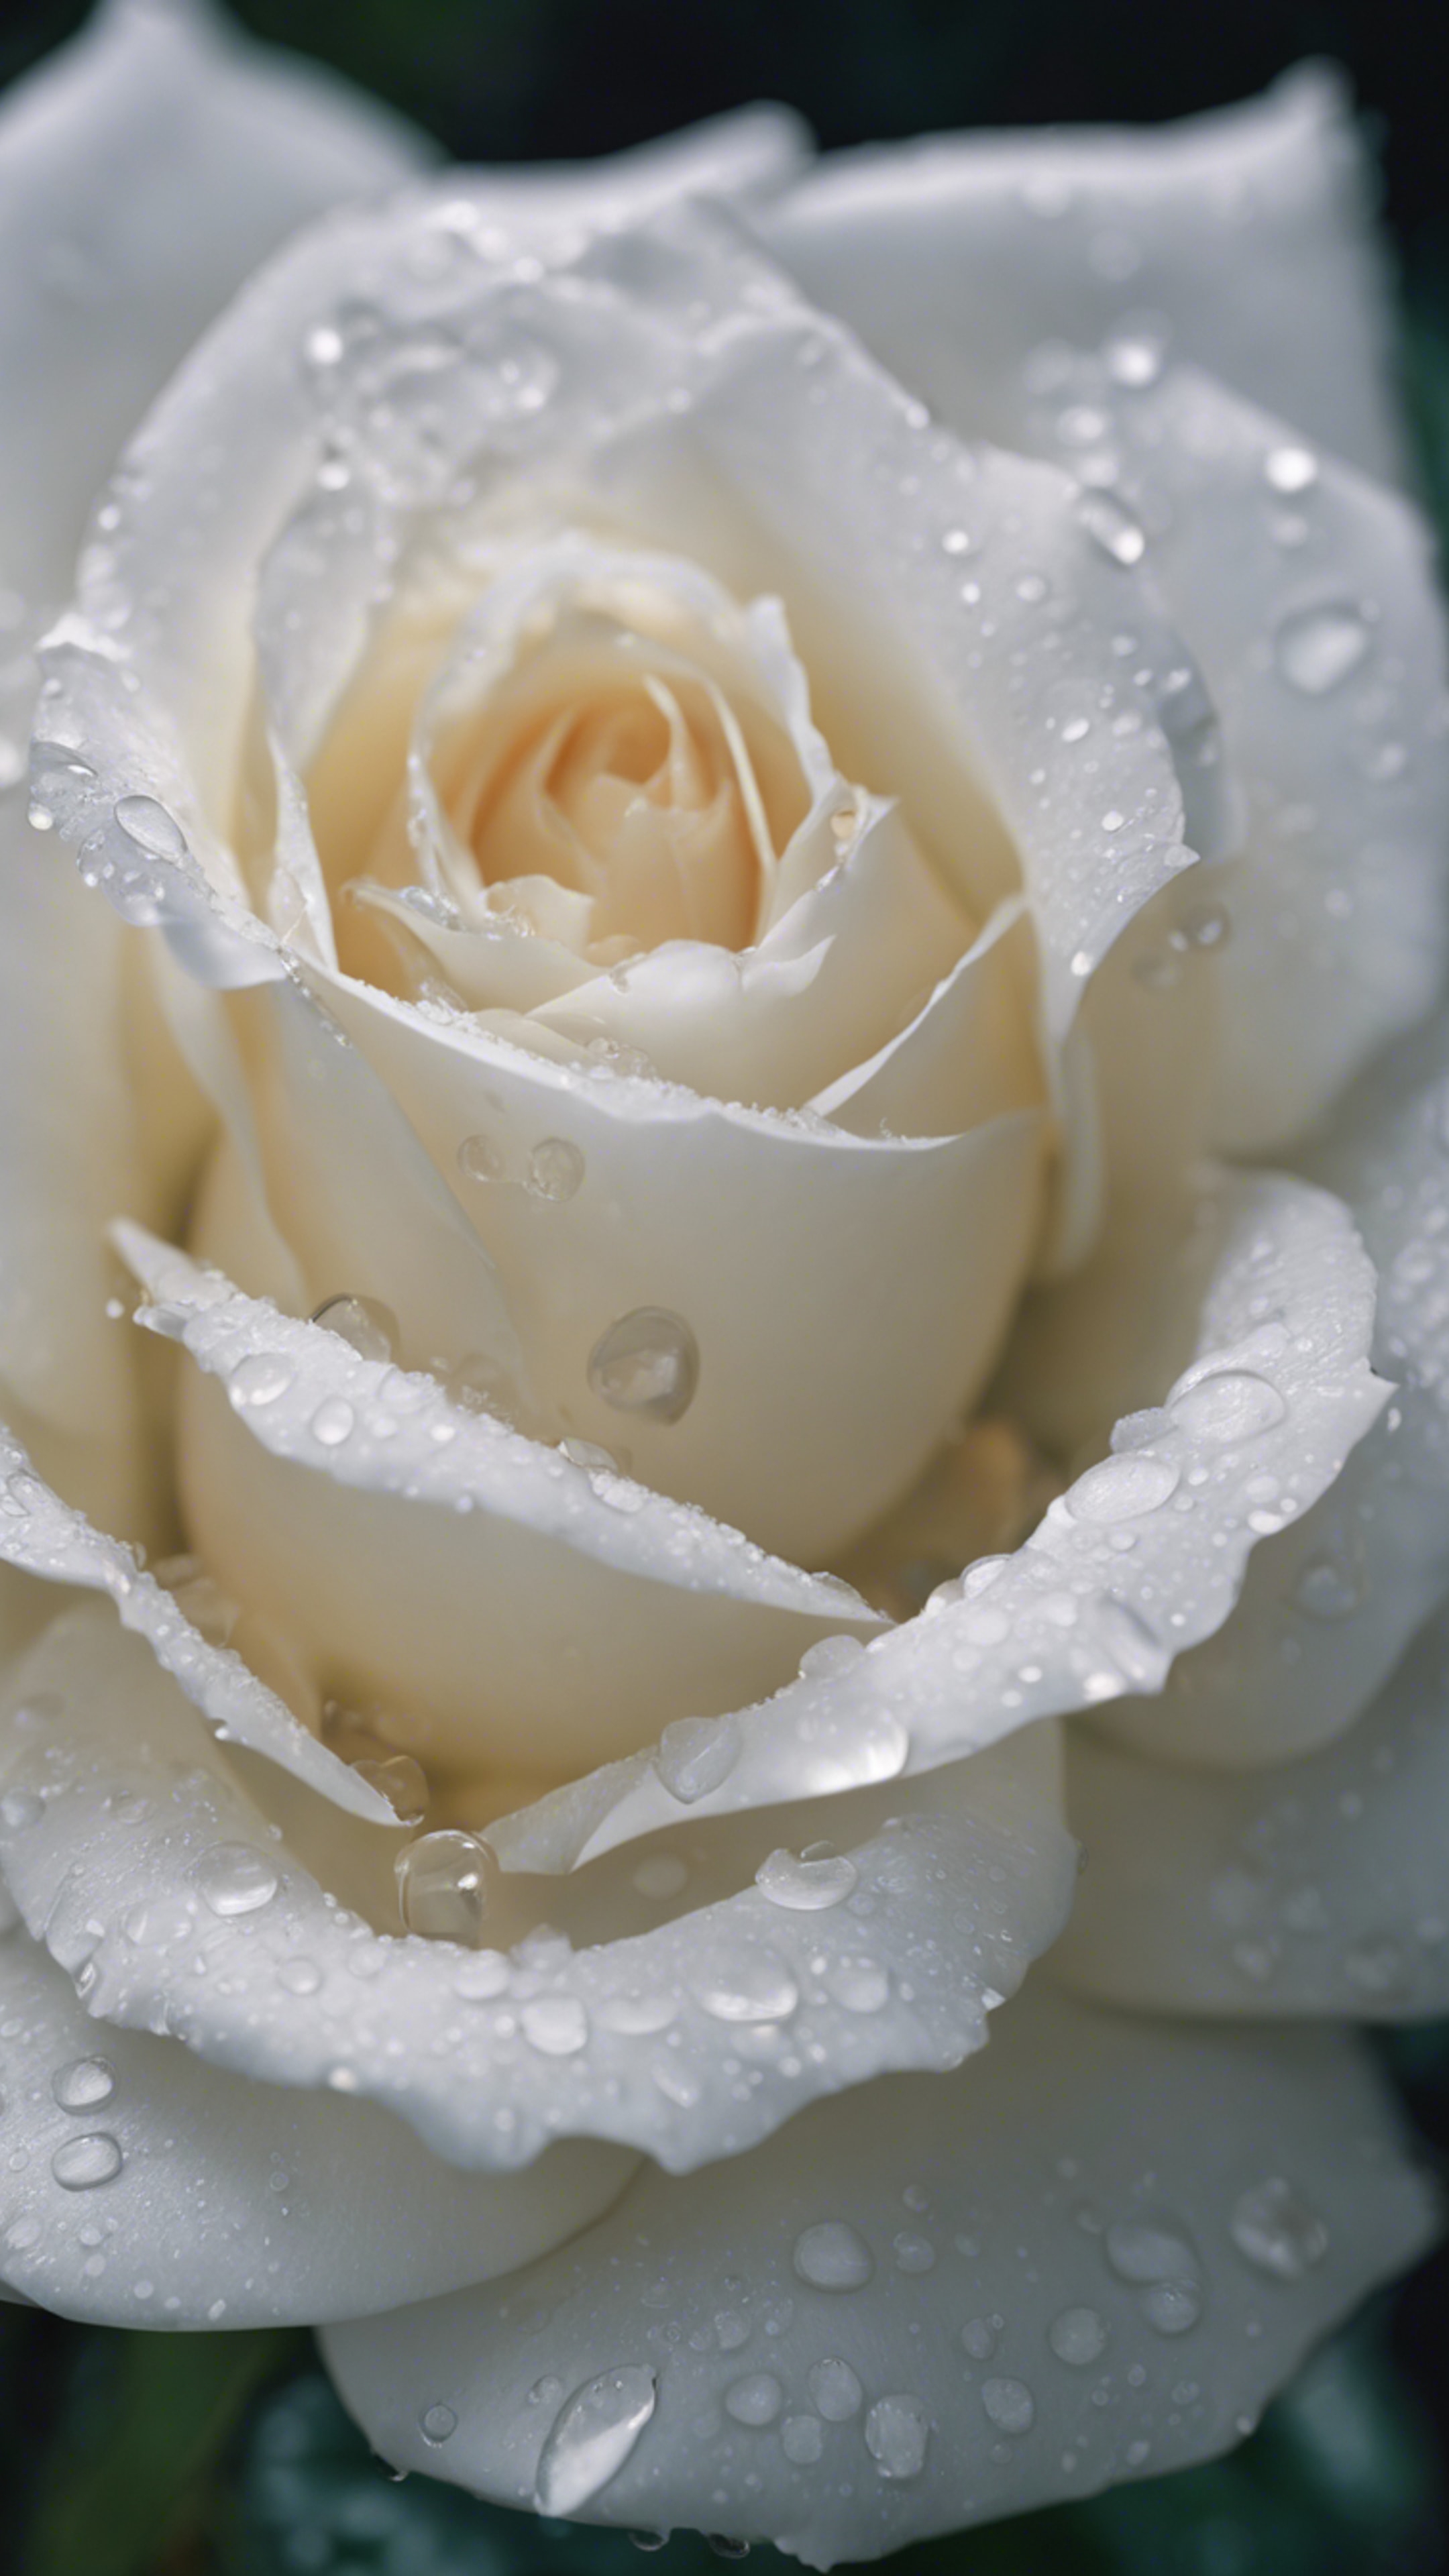 Close-up of a white rose in full bloom, a droplet of water hanging off one petal.壁紙[2daa22f287134494a68f]